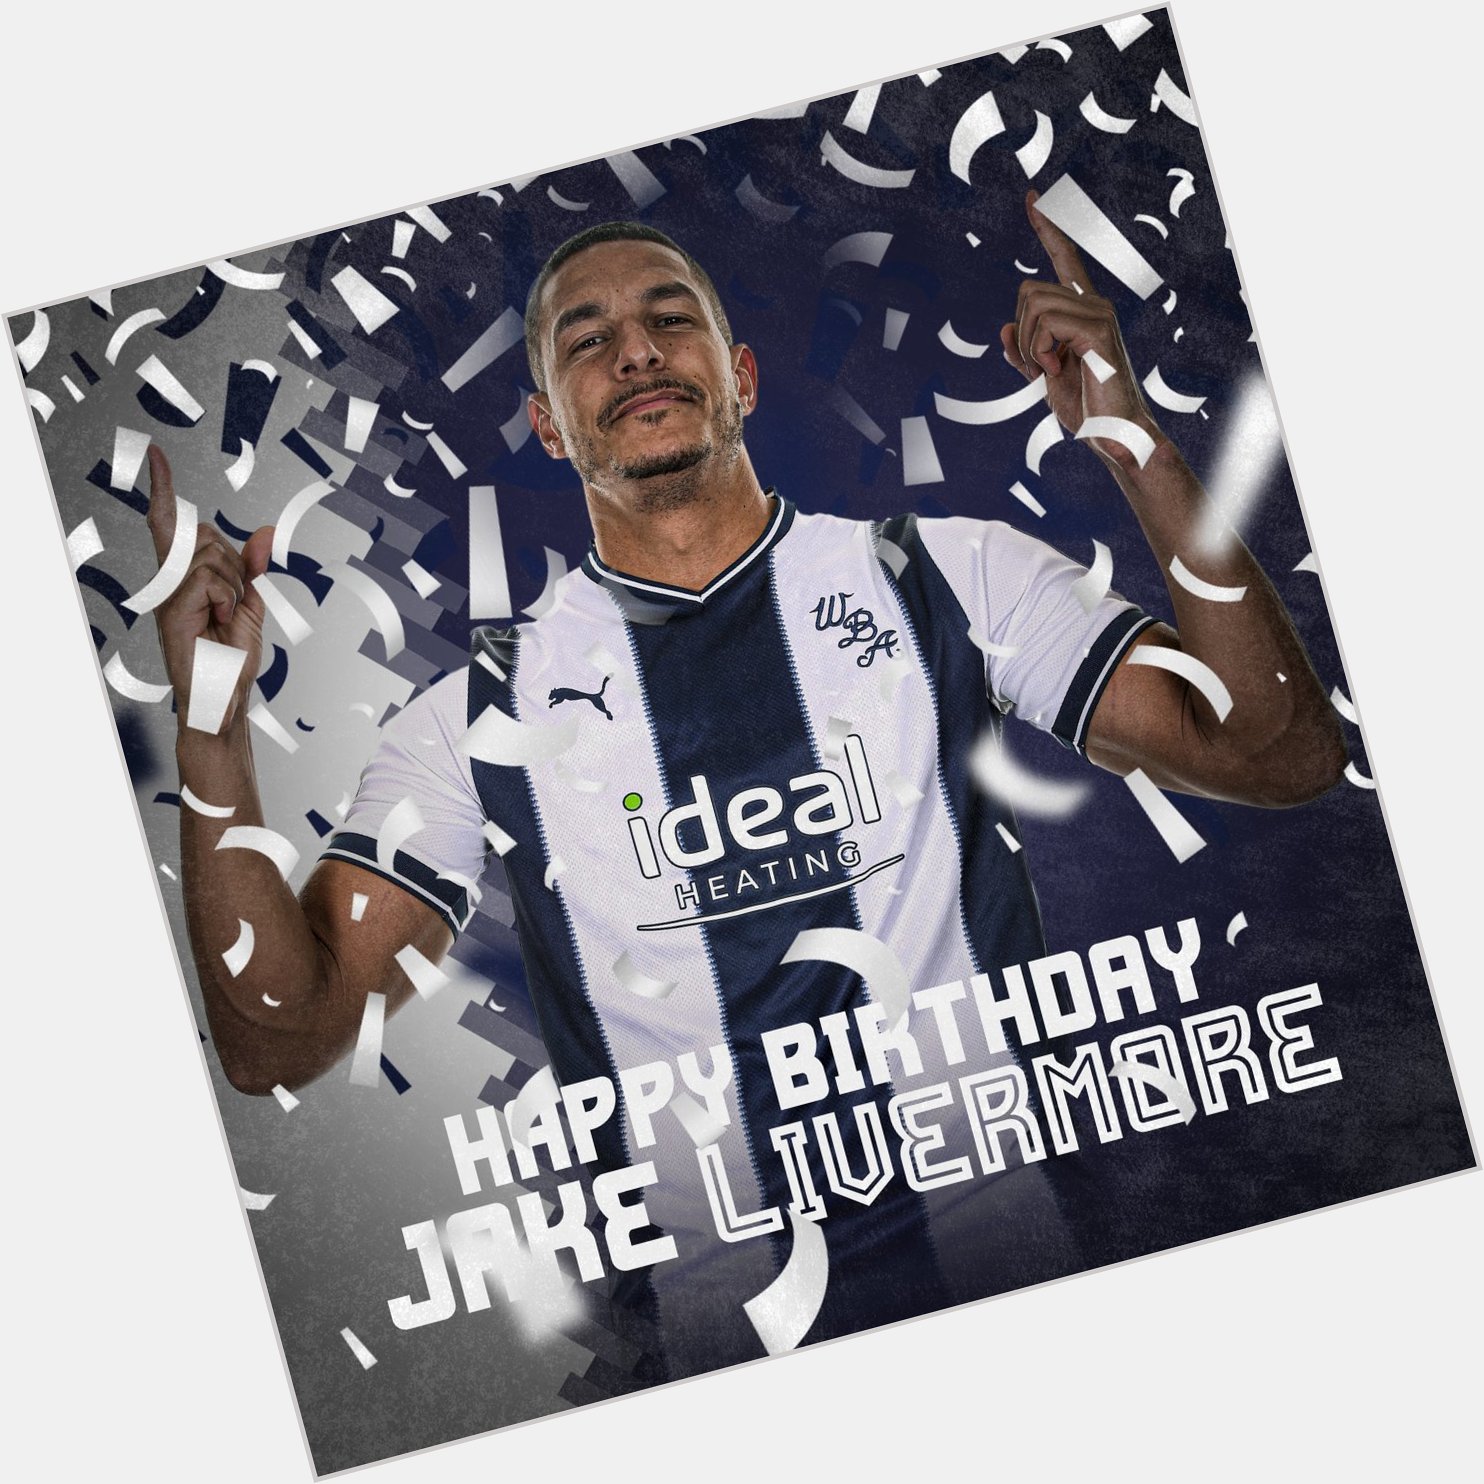 Wishing a very happy 33rd birthday today to Jake Livermore!

Have a great day, Jake! 